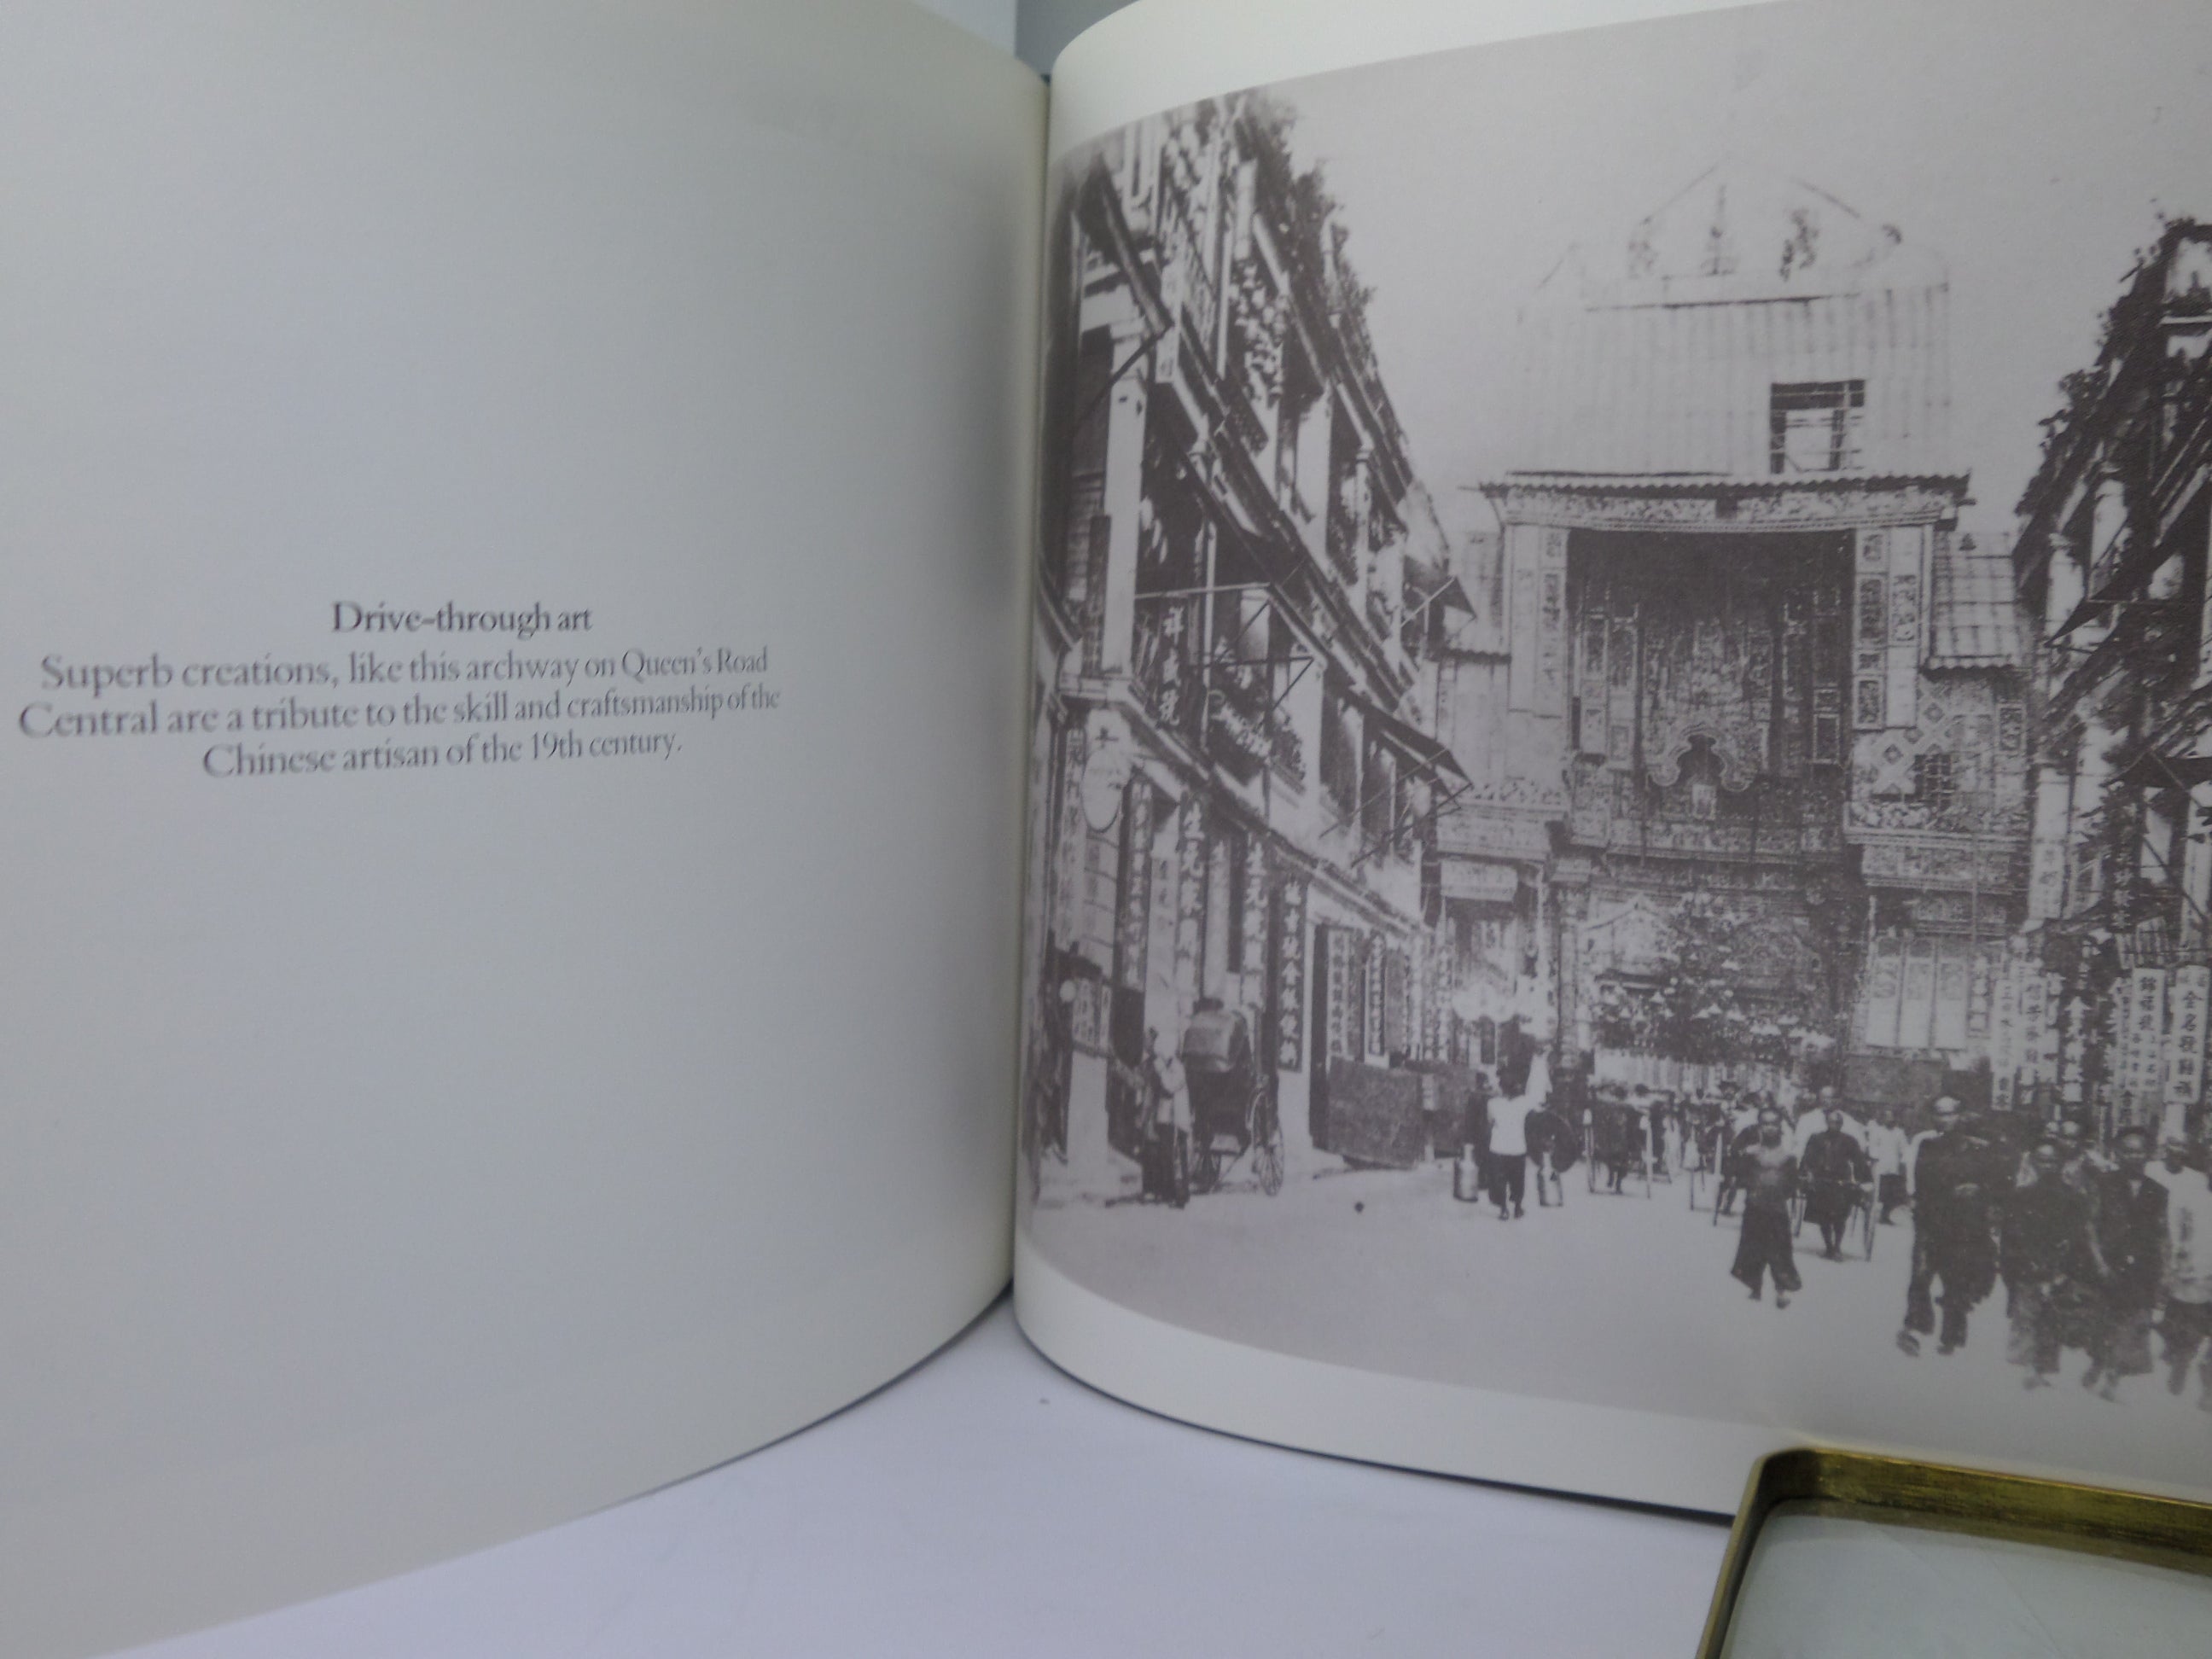 HONG KONG YESTERDAY: FESTIVE OCCASIONS CA.1989 RARE HARDCOVER PHOTO-BOOK